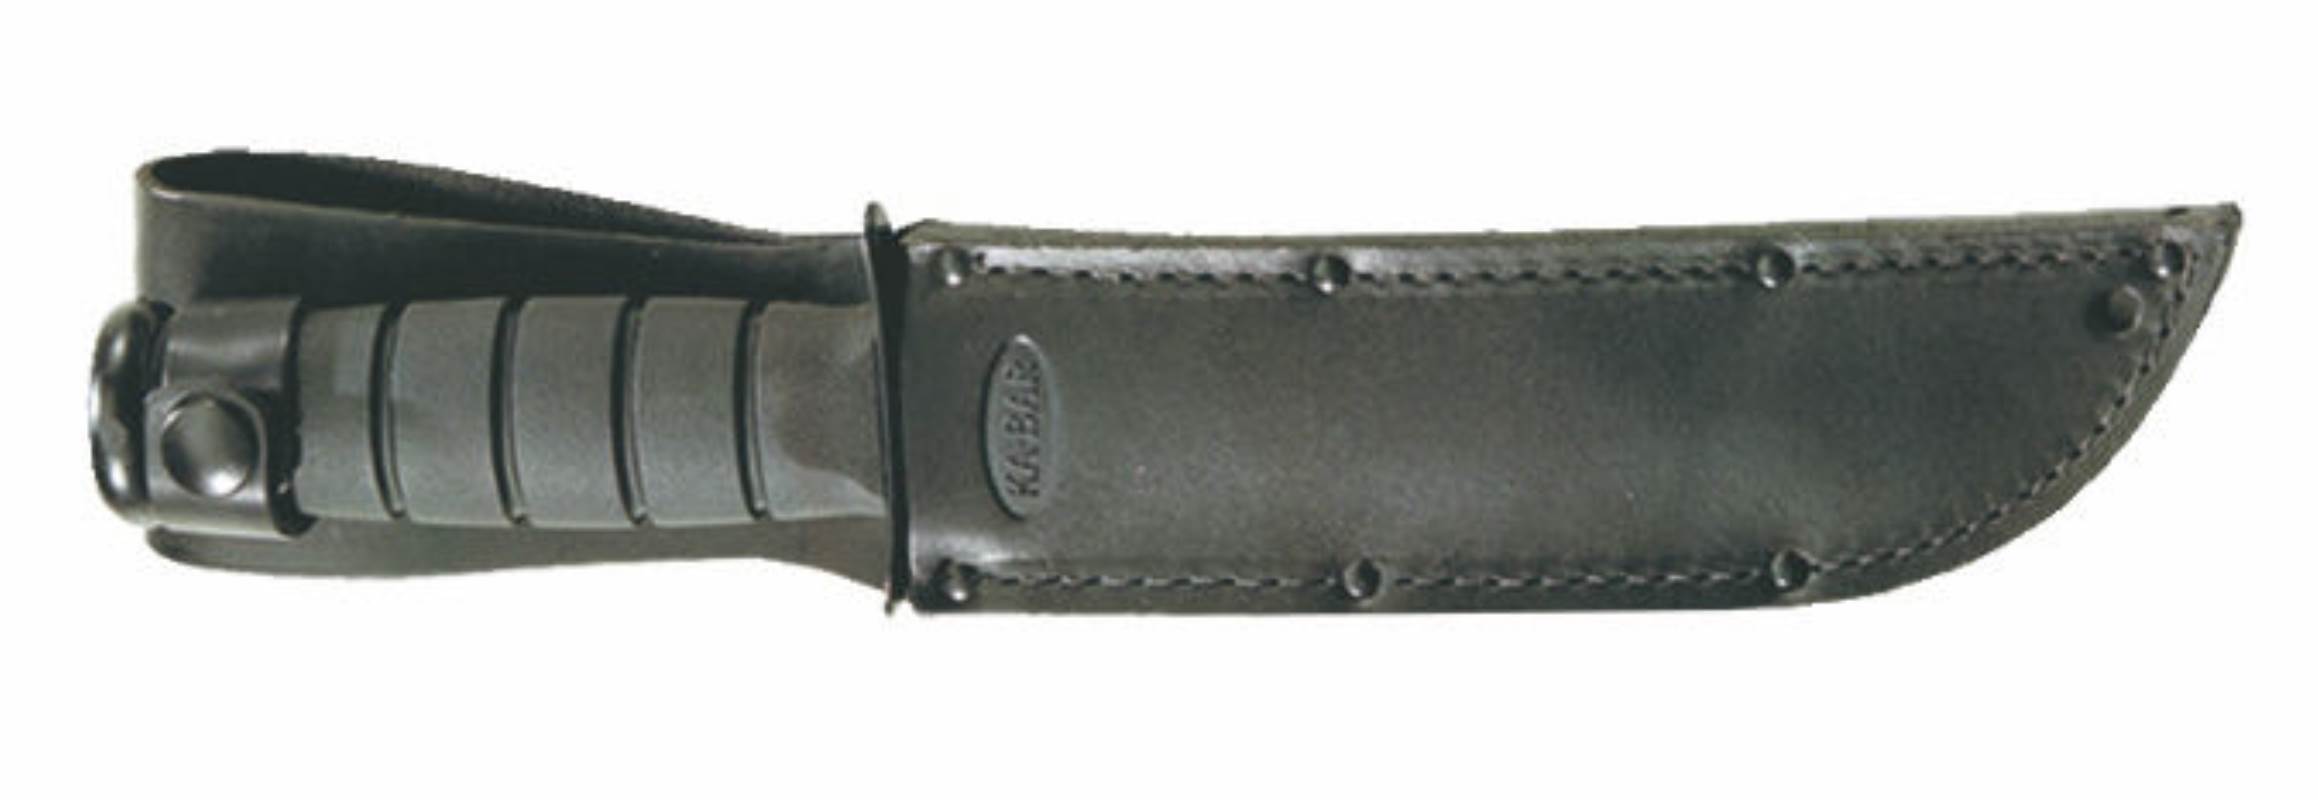 Black Leather Replacement Sheath